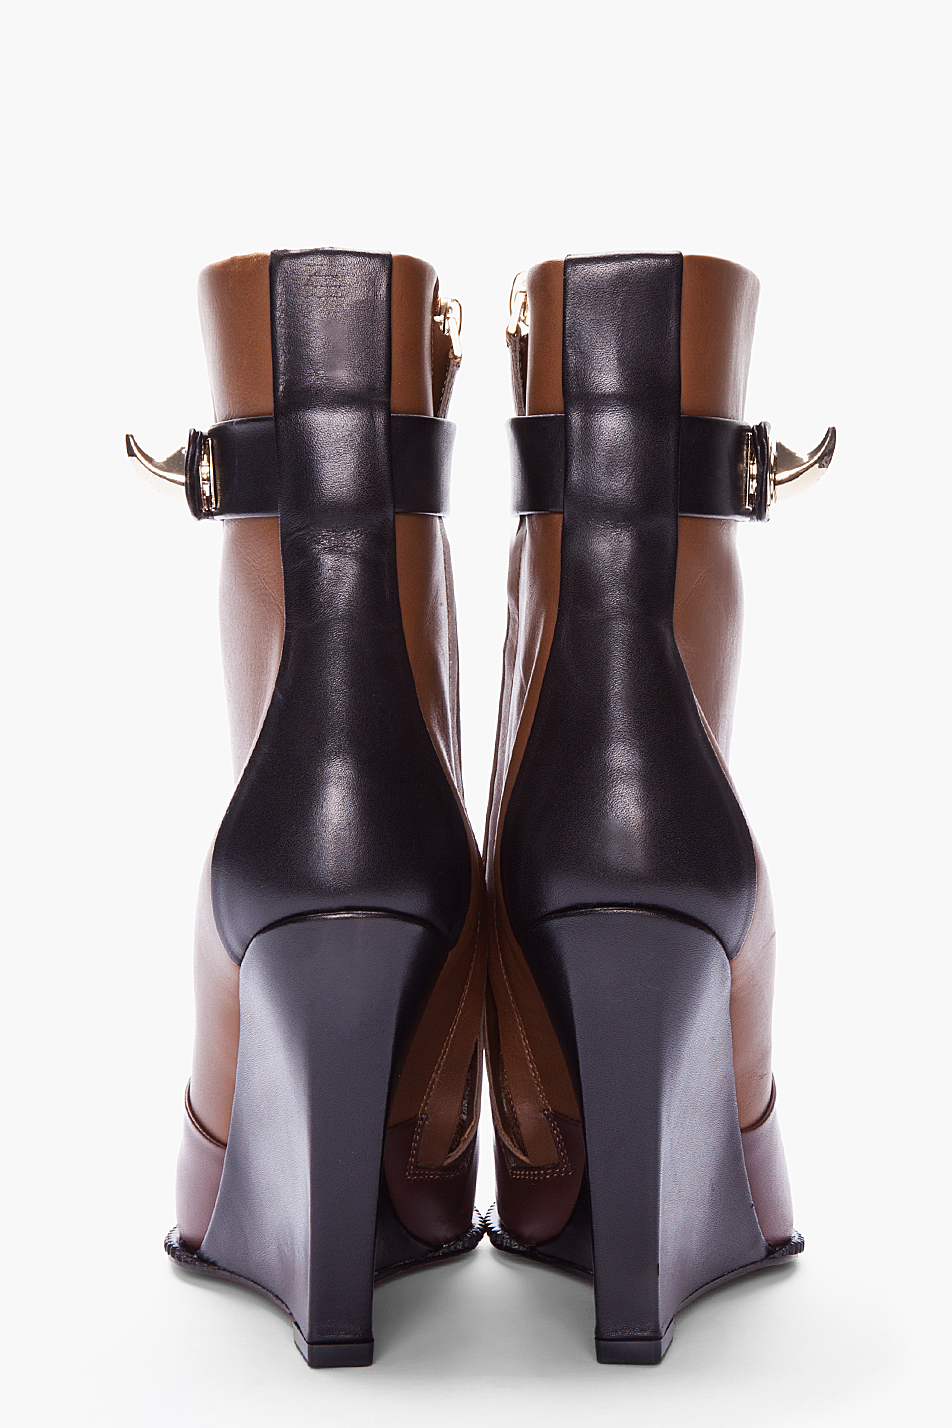 Lyst - Givenchy Brown Tricolor Sharklock Wedge Boots in Brown